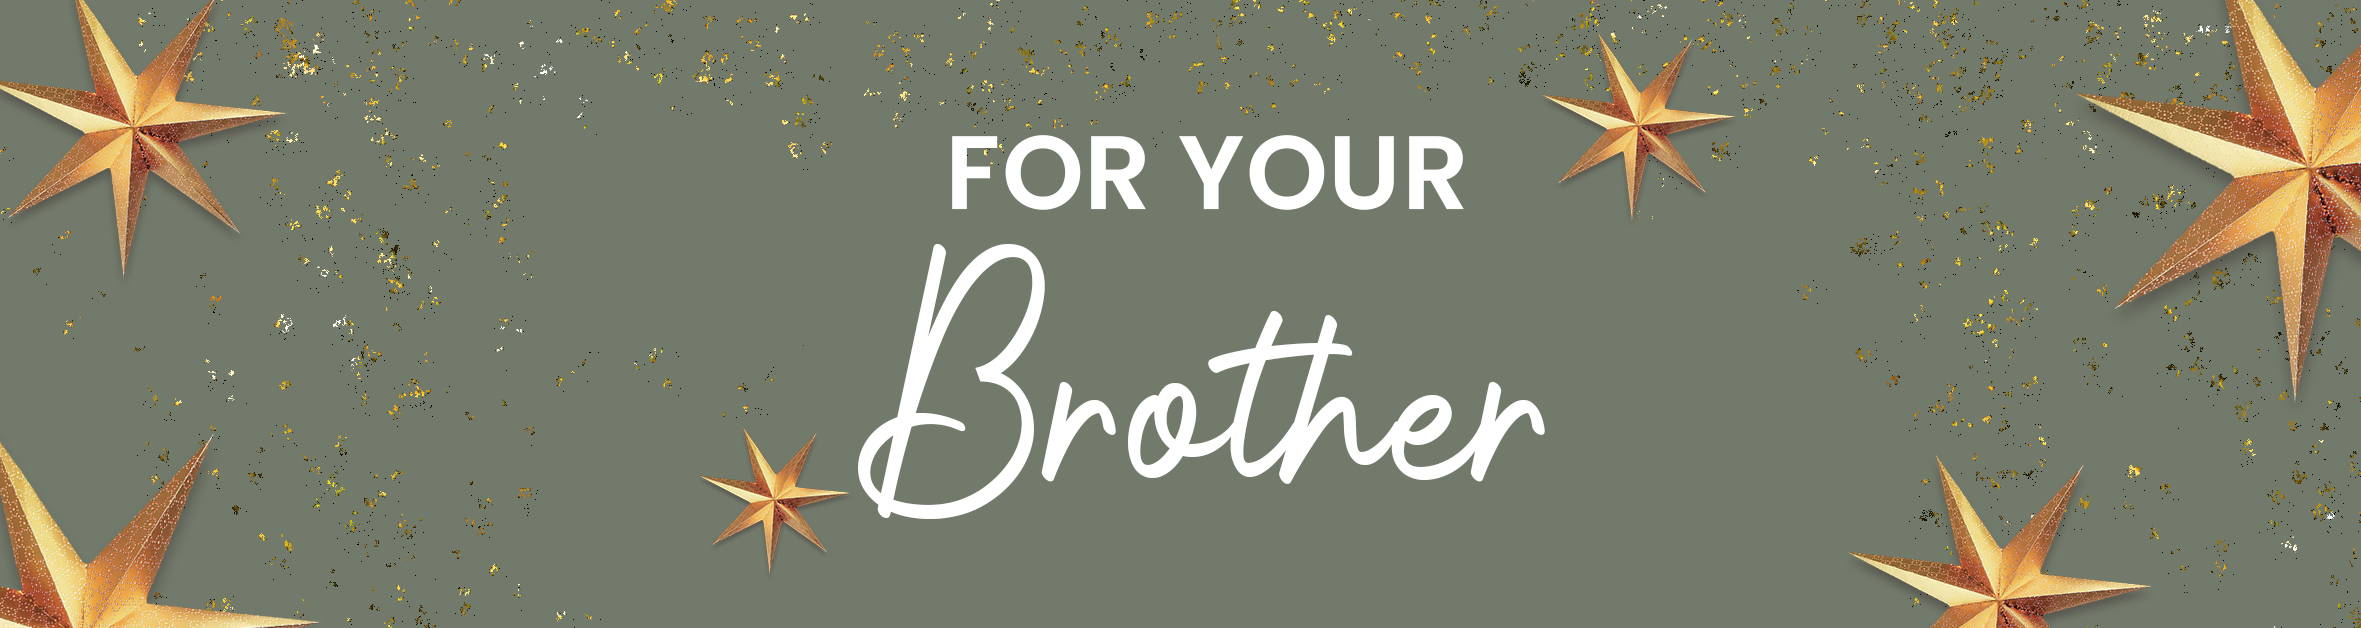 Funny Mug Gift For Brother, Gifts To Give To Your Brother, Worlds Greatest  Brother, Present Ideas For Brother, Graduation Gifts For Brother - Sweet  Family Gift